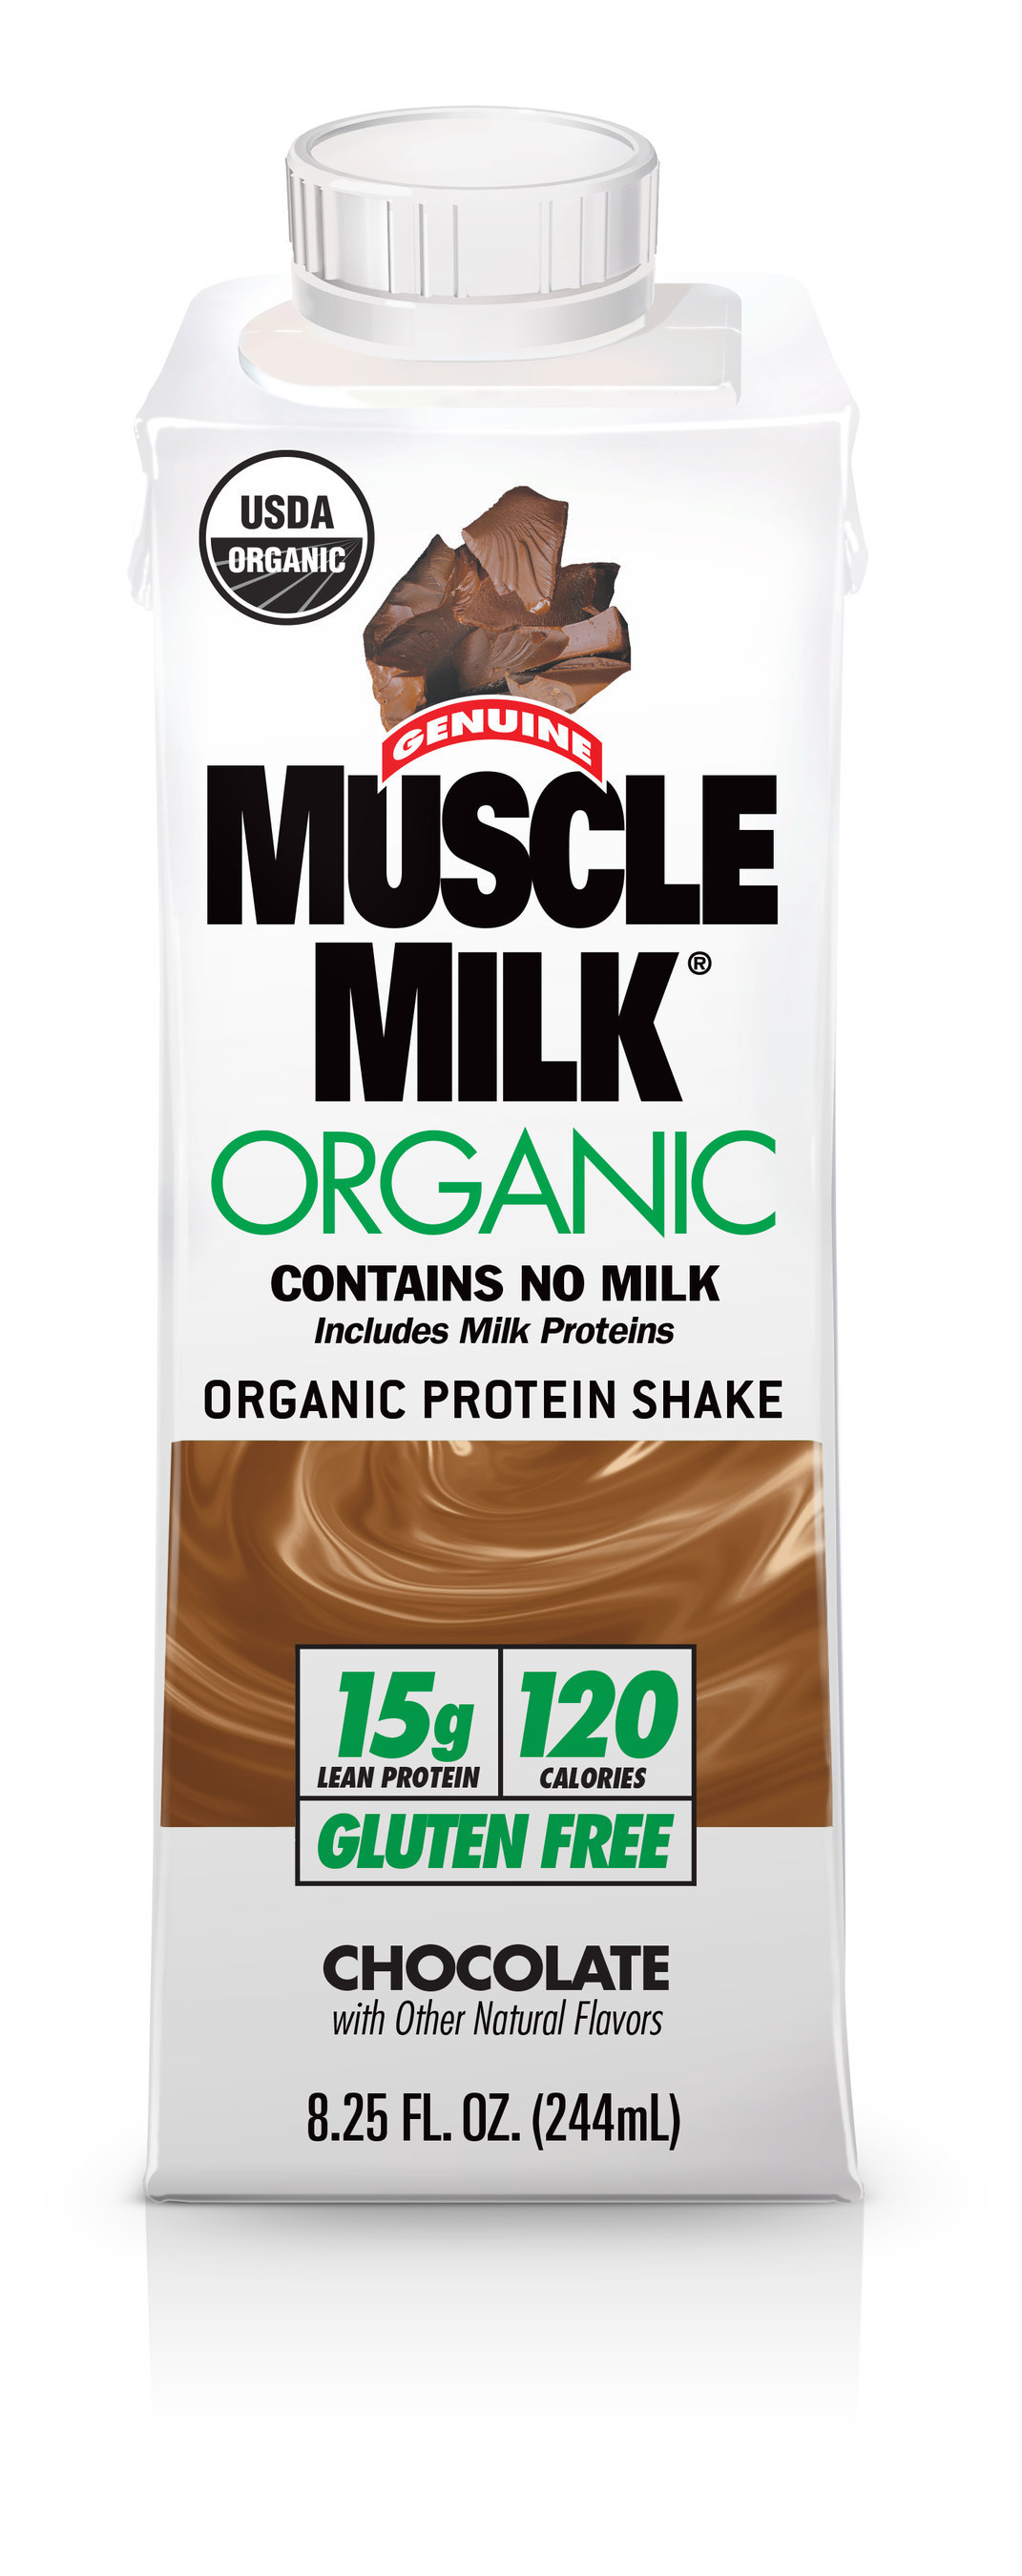 Muscle Milk Organic is now available exclusively at Target stores nationwide and Target.com. As the first certified organic product from the Muscle Milk brand, it's packed with 15 grams of organic protein and sweetened with organic cane sugar and organic stevia.  Pick up a 4-pack today for $8.99. (PRNewsFoto/CytoSport)